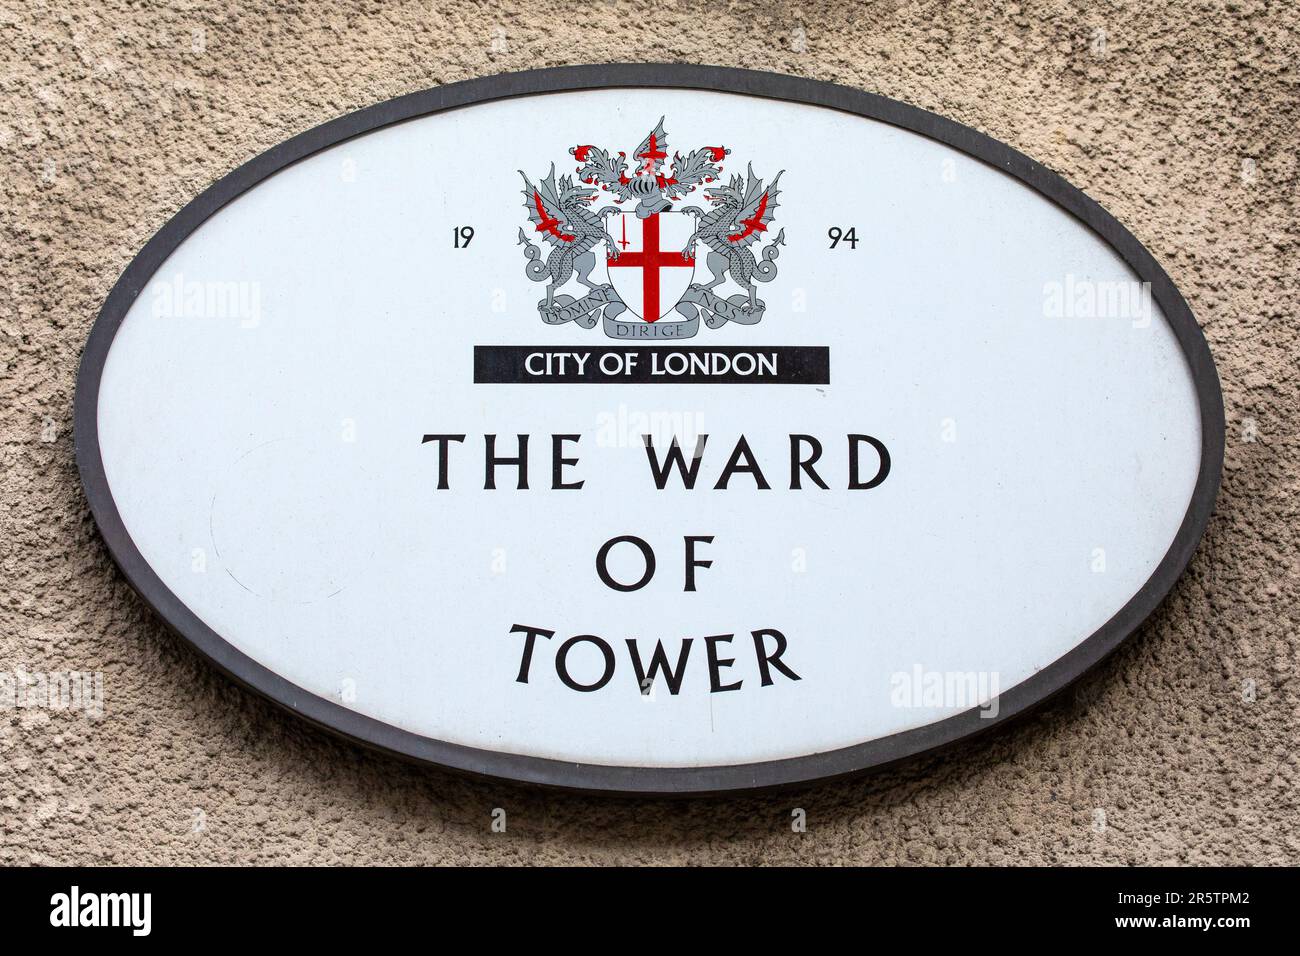 London, UK - April 27th 2023: A sign marking the location of the ward of Tower in the City of London, UK. Stock Photo